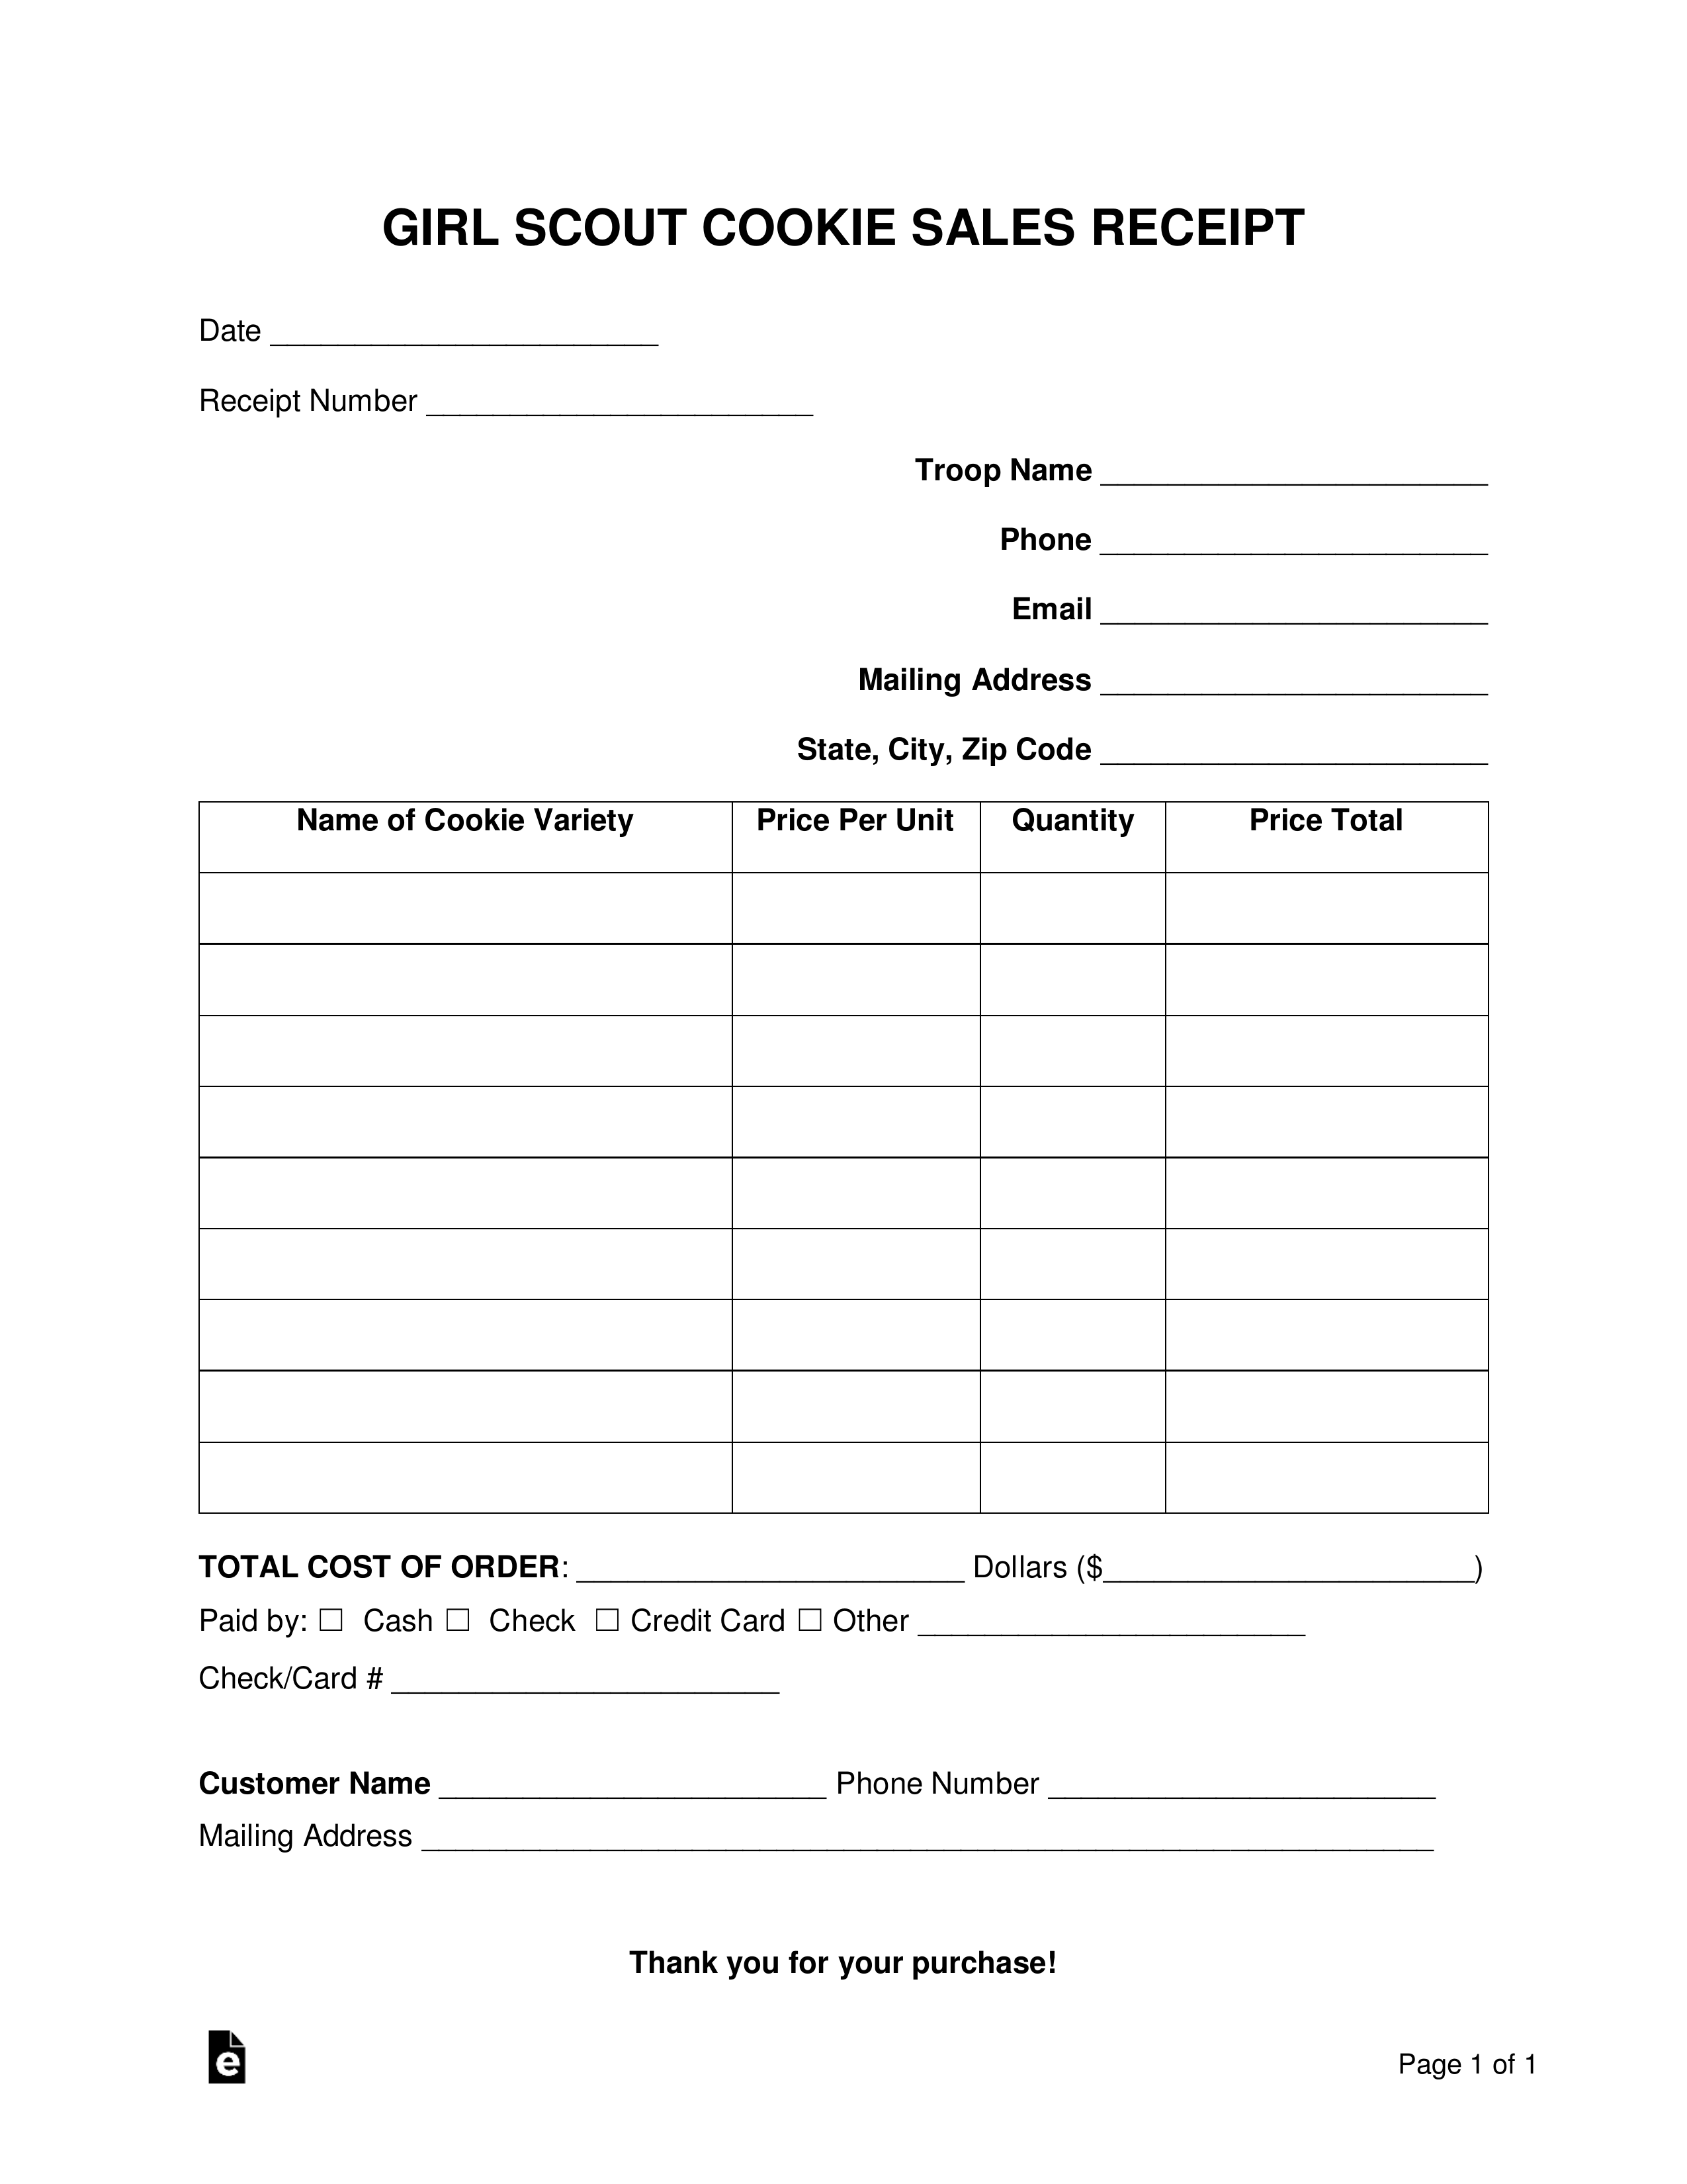 Free Girl Scout Cookie Receipt Template